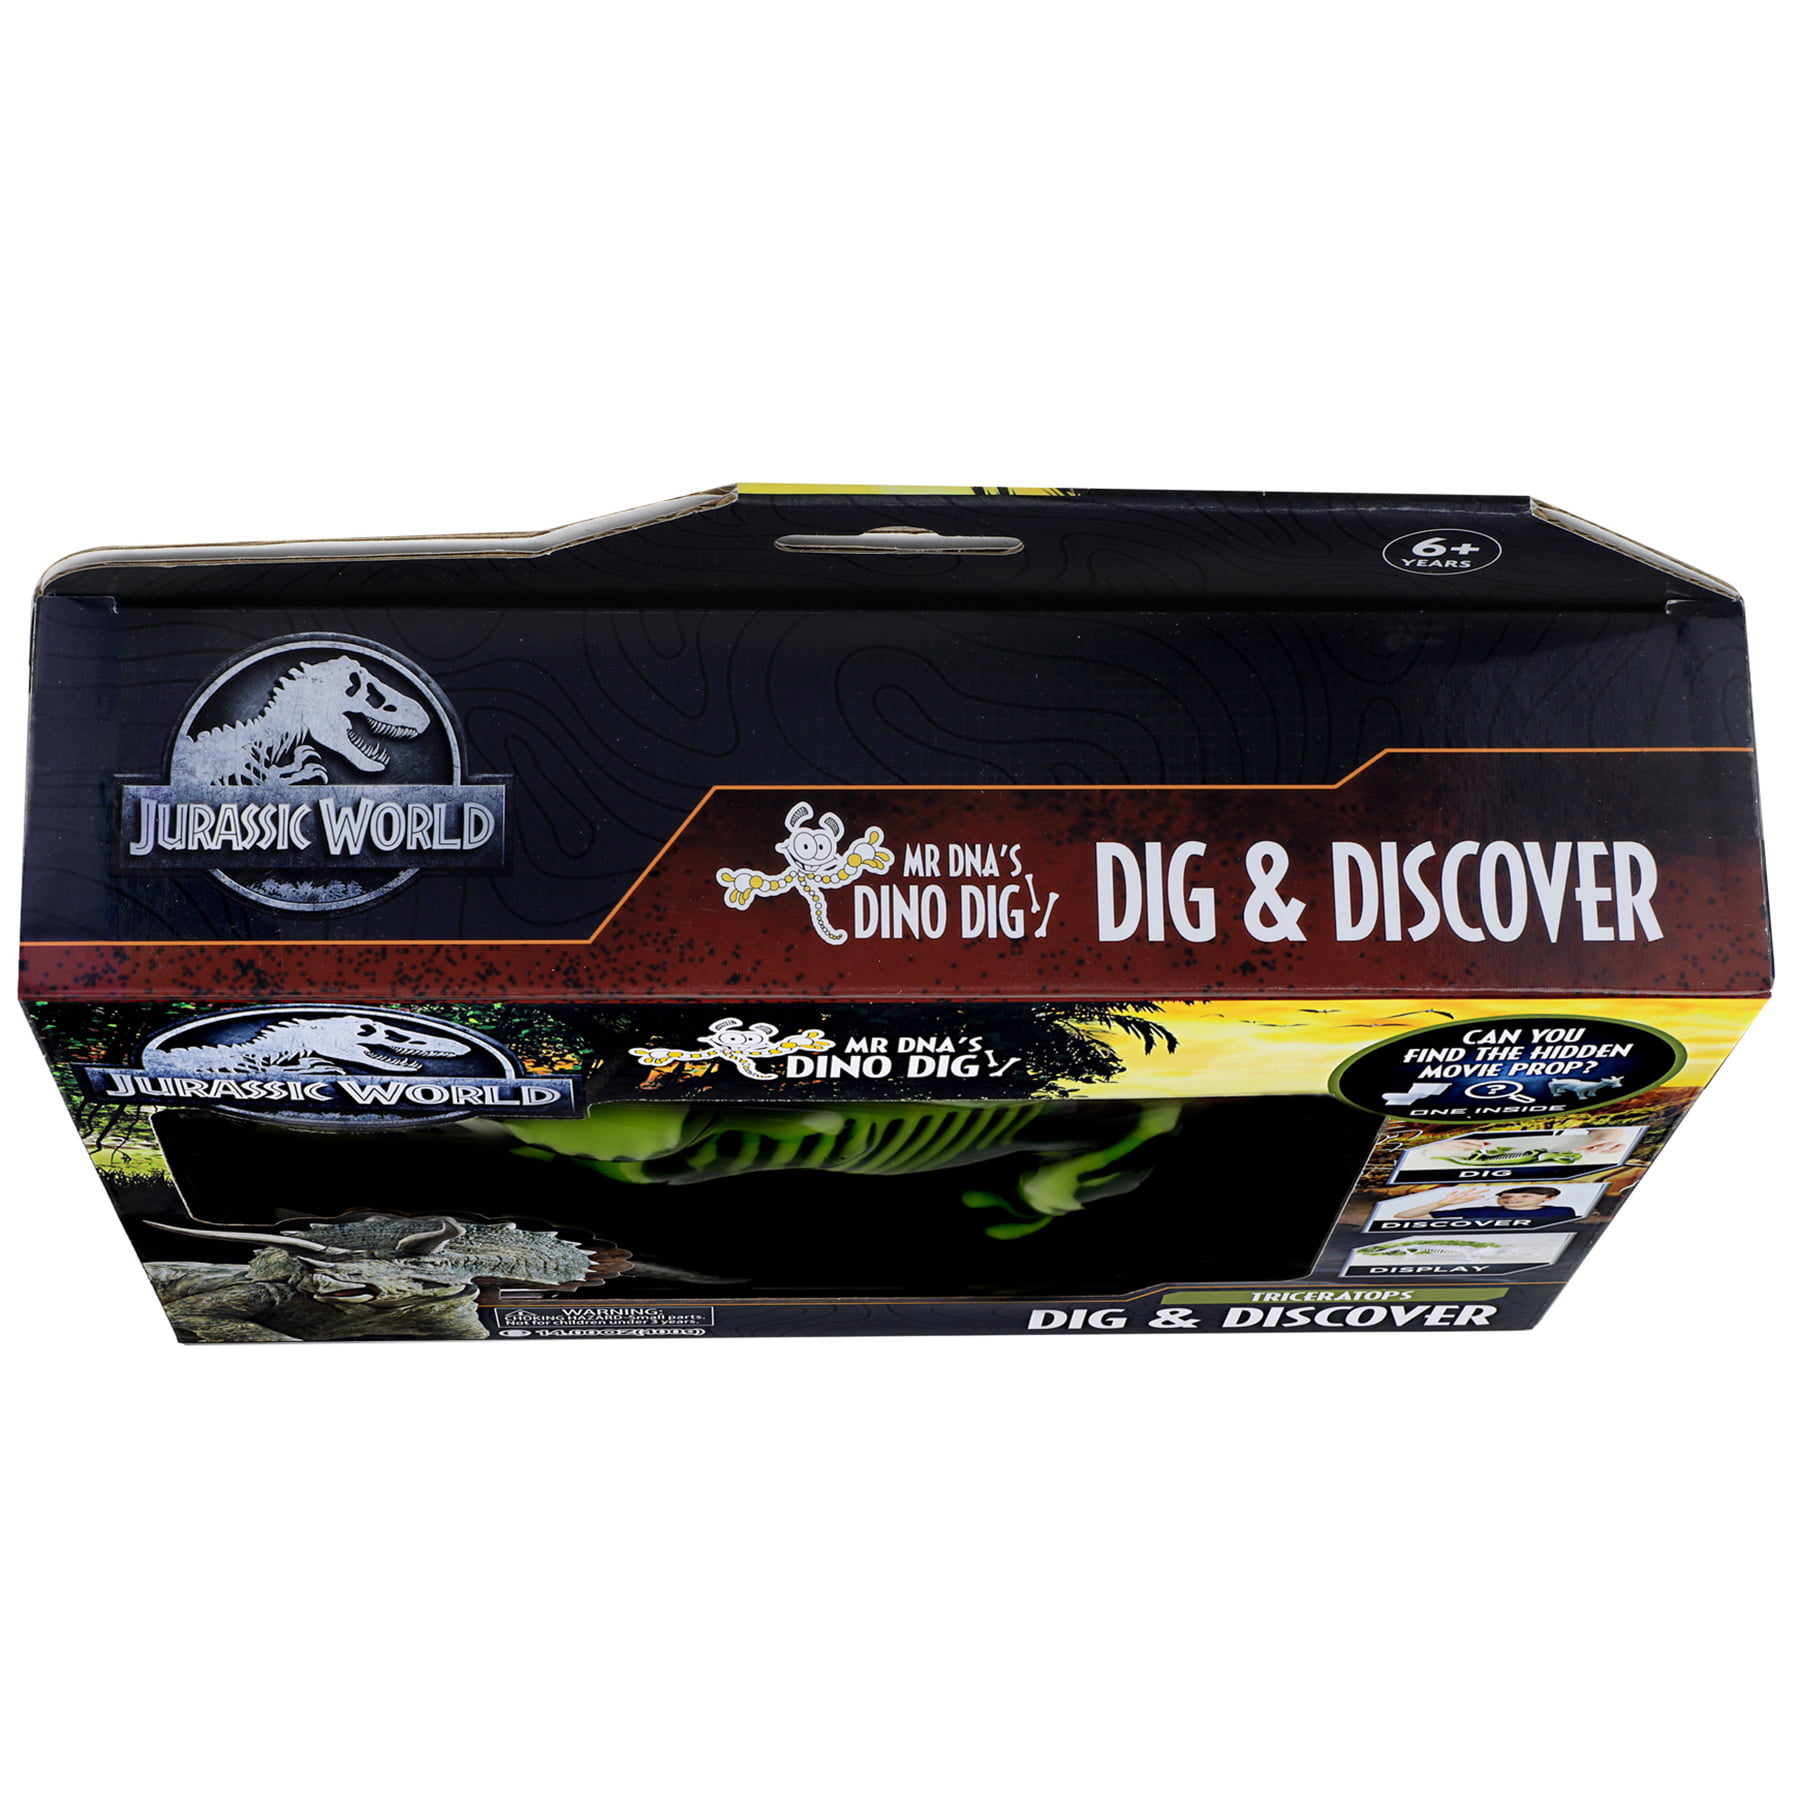 Elenco Dig It Triceratops Science Kit for sale online 